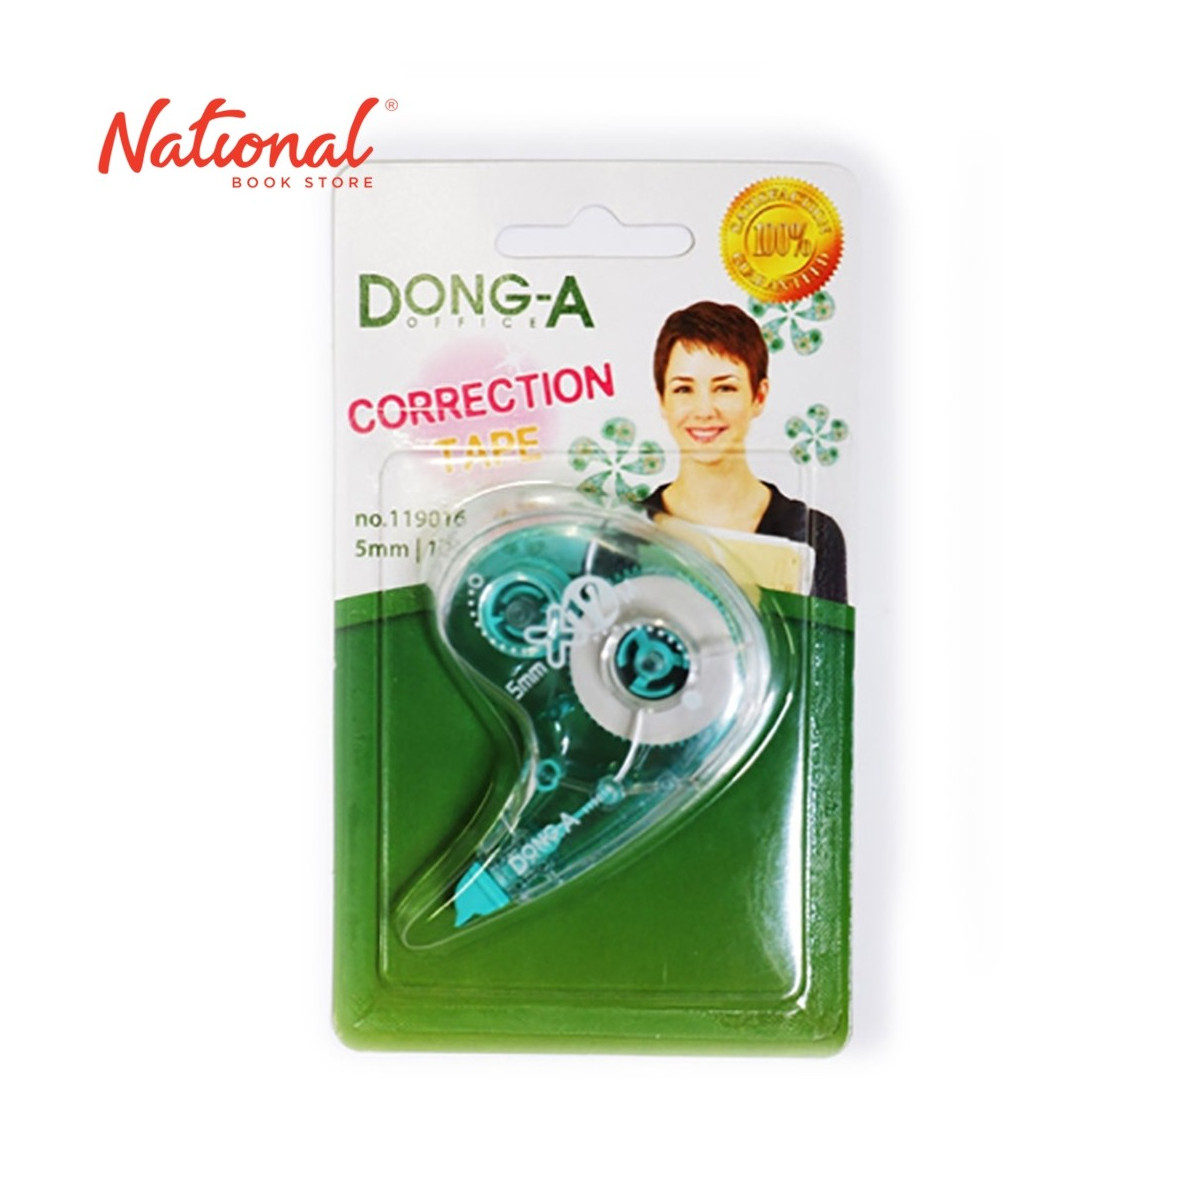 DONG-A CORRECTION TAPE 119016 5MMX12M